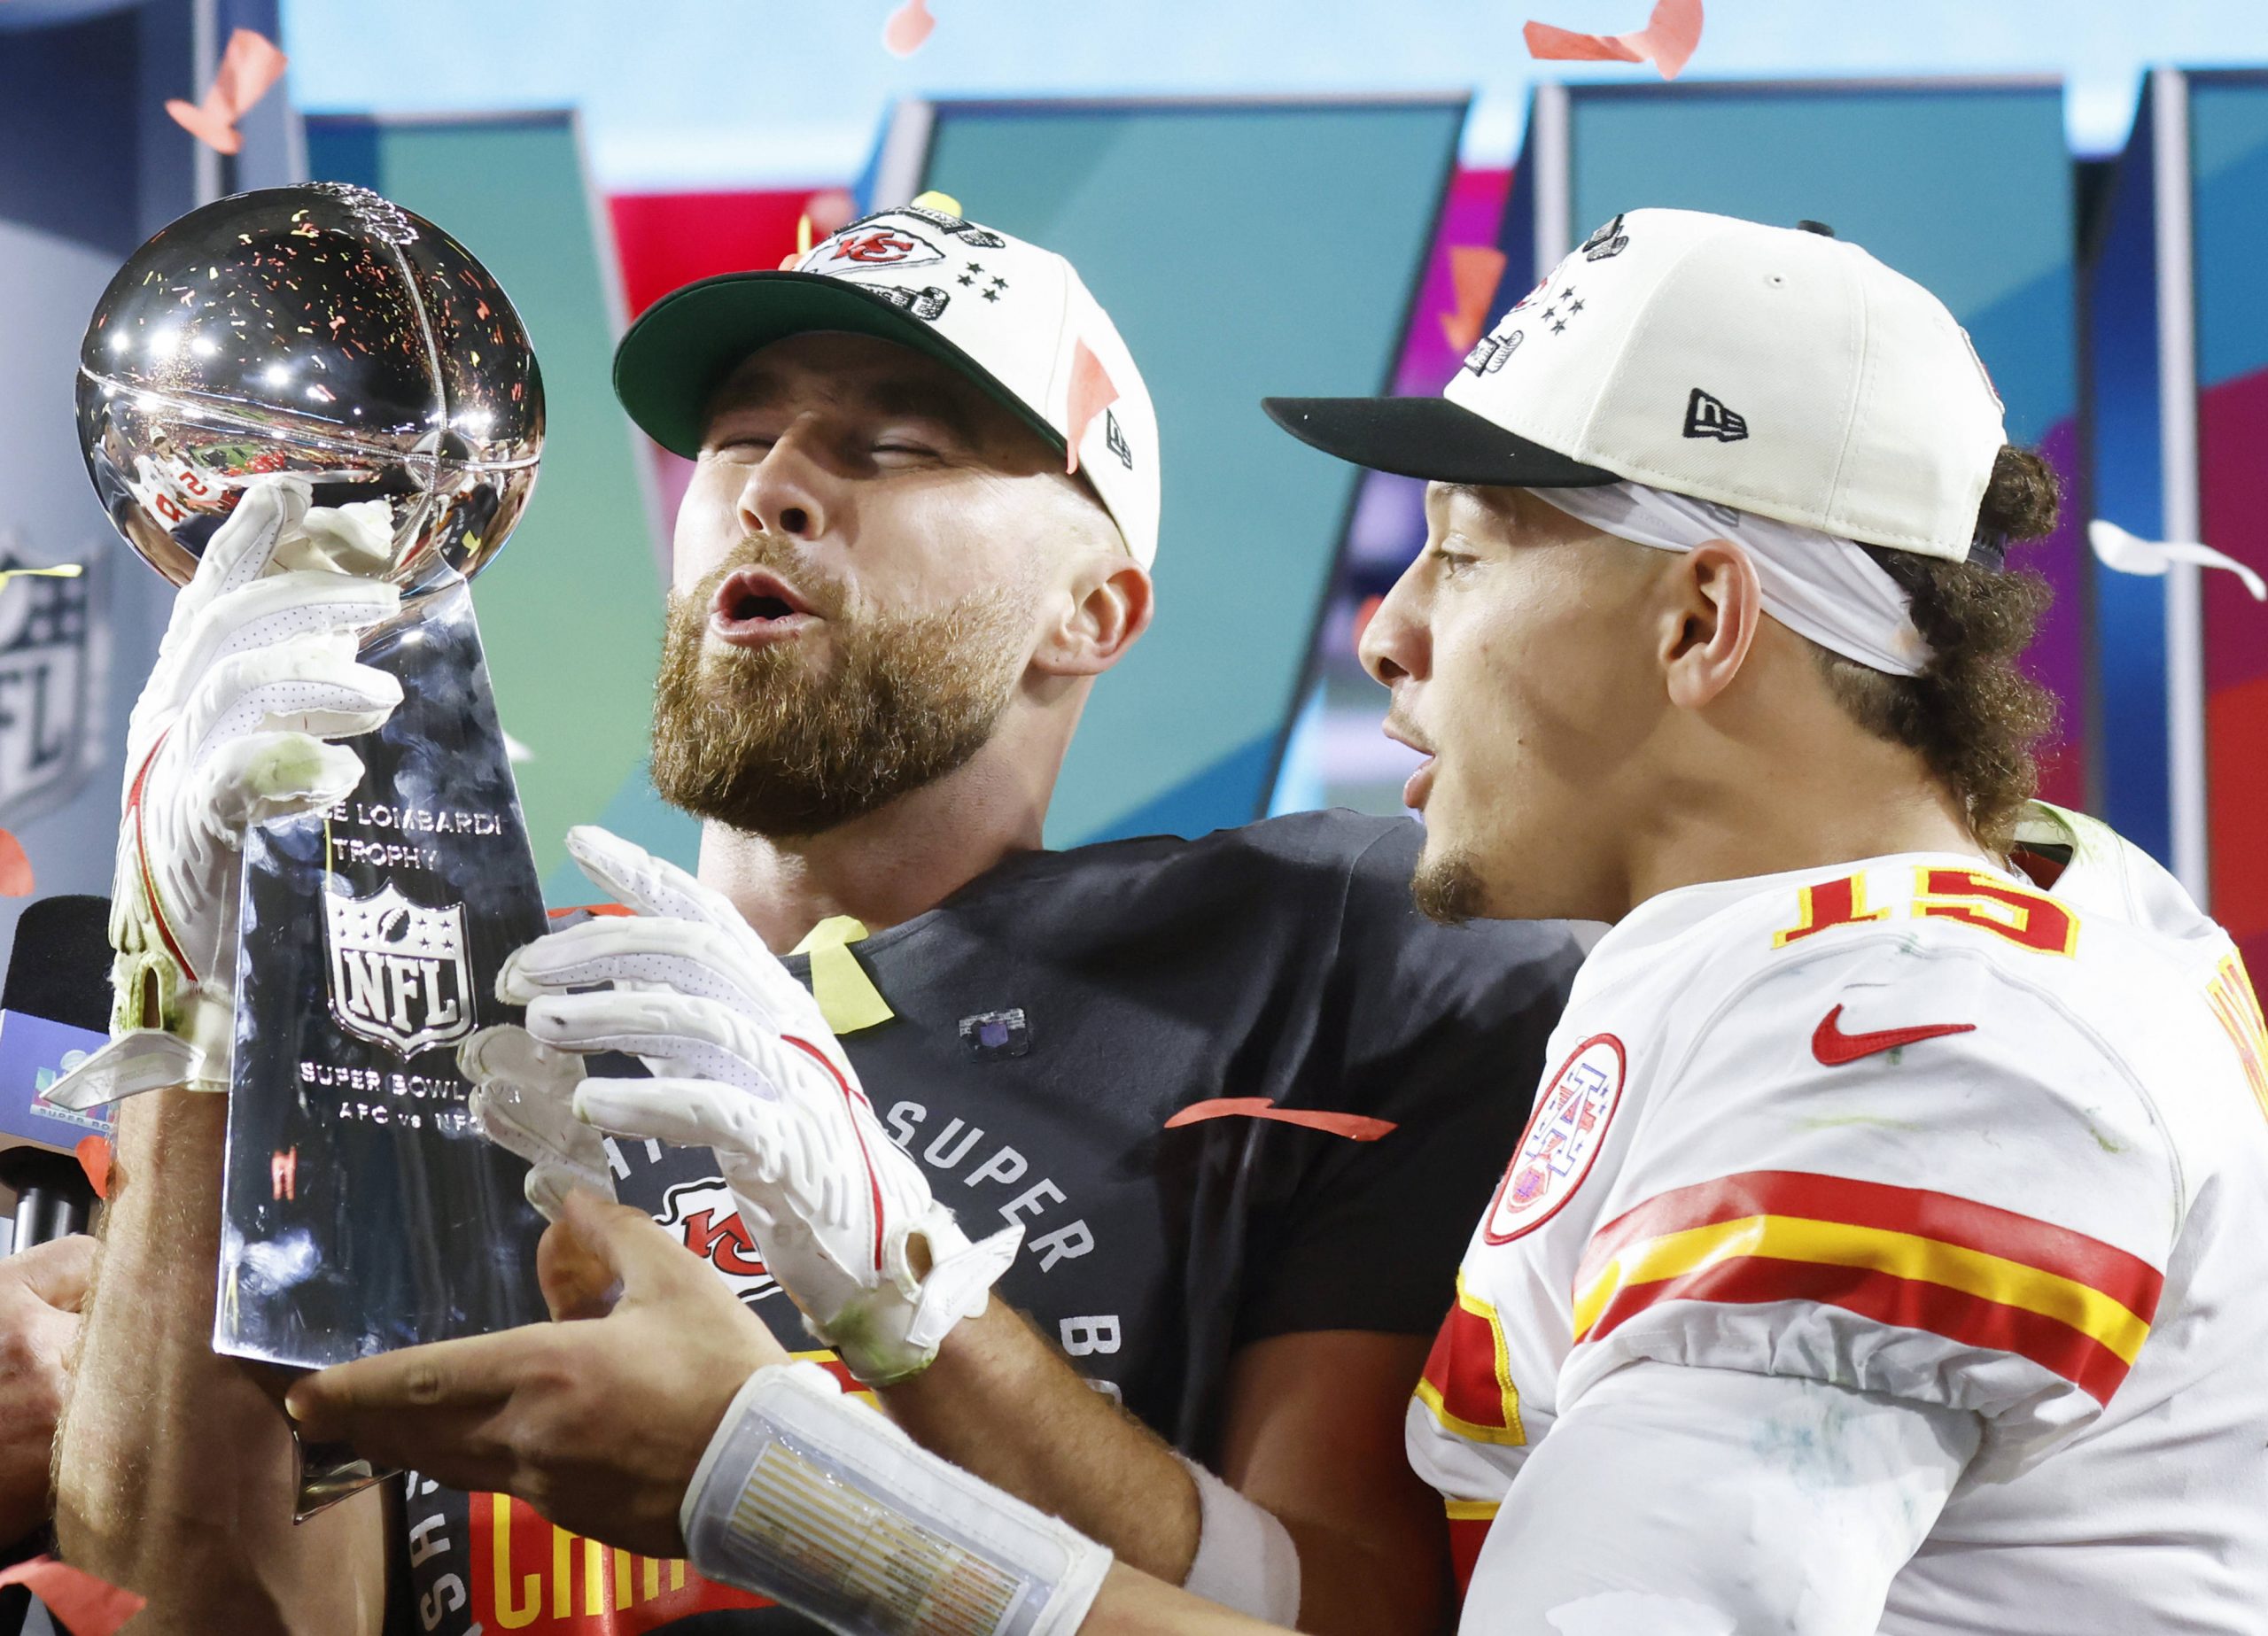 NFL Kickoff 2023 - Kansas City Chiefs quarterback Patrick Mahomes 15 and tight end Travis Kelce celebrate with the the Lombardi Trophy after winning Super Bowl LVII 38-35 over the Philadelphia Eagles at State Farm Stadium in Glendale, Arizona, on Sunday, February 12, 2023. PUBLICATIONxINxGERxSUIxAUTxHUNxONLY SBP202302121054 JOHNxANGELILLO